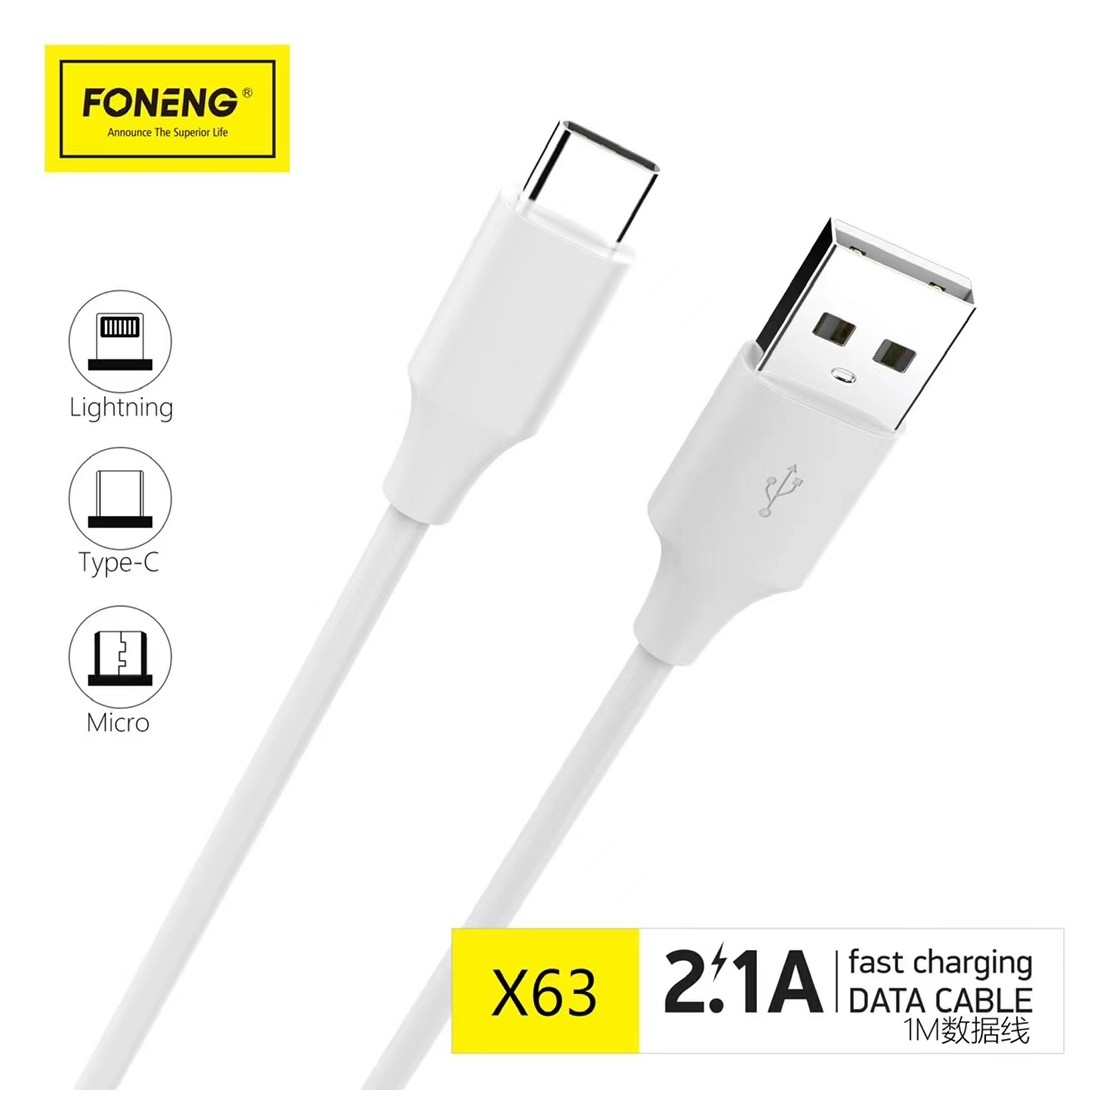 Foneng X63 Data cable Type C Fast Charging 2.1A 1m ΛΕΥΚΟ | cooee.gr